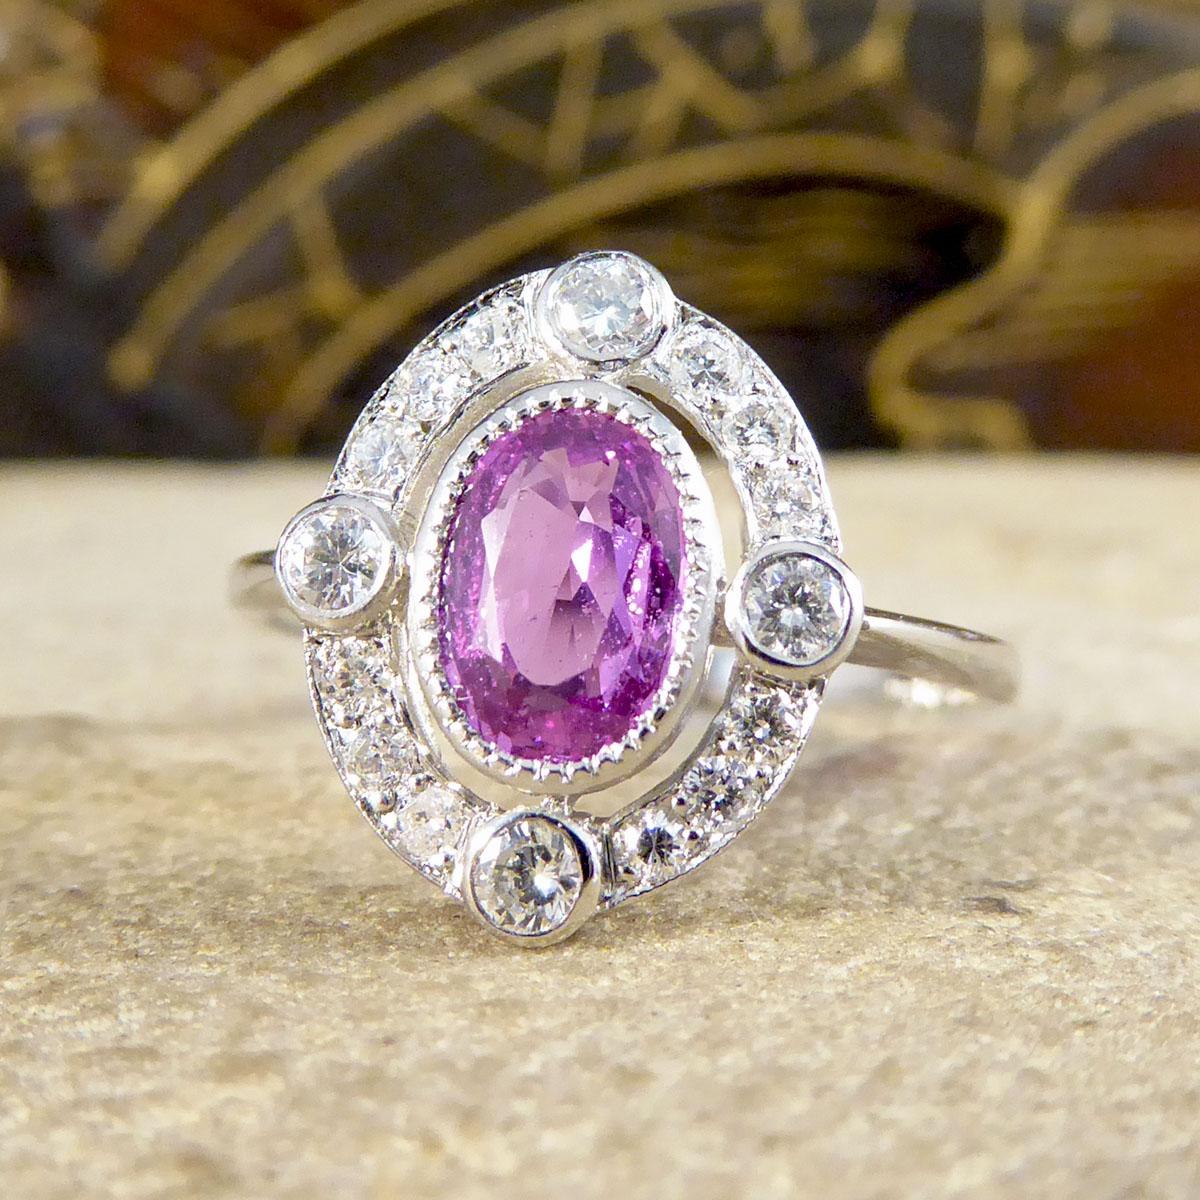 Contemporary 1.05ct Pink Sapphire and Diamond Halo Ring Mounted in Platinum In Good Condition For Sale In Yorkshire, West Yorkshire